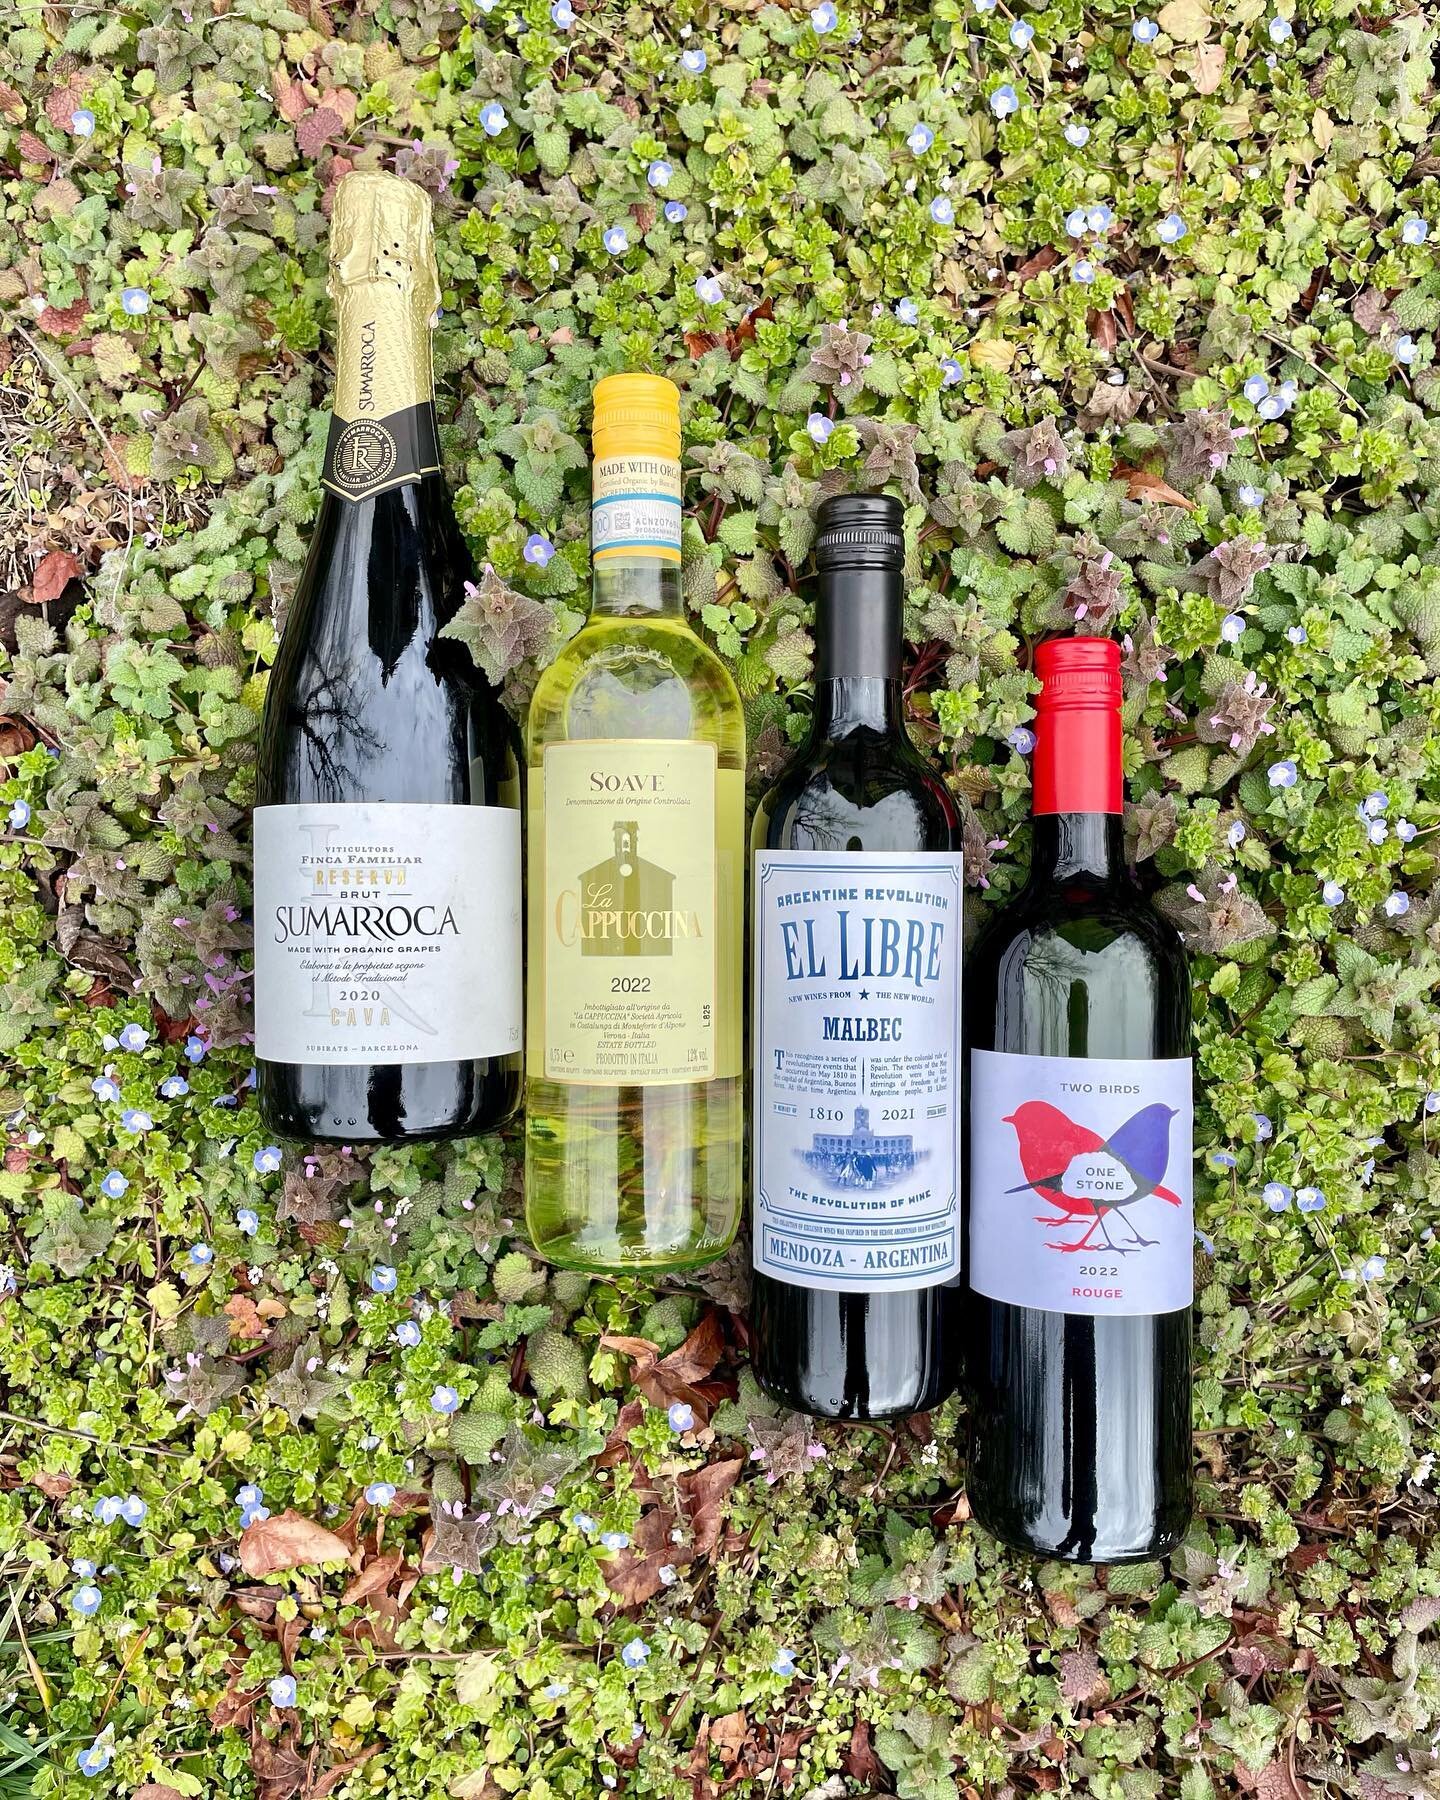 Want to brighten up this upcoming rainy Saturday? Stop by Locke Store and try these delicious wines, all under $20!  We&rsquo;ll also be pouring Founders All Day IPA for you to try, all between 12 and 3pm. 

We hope to see you there!